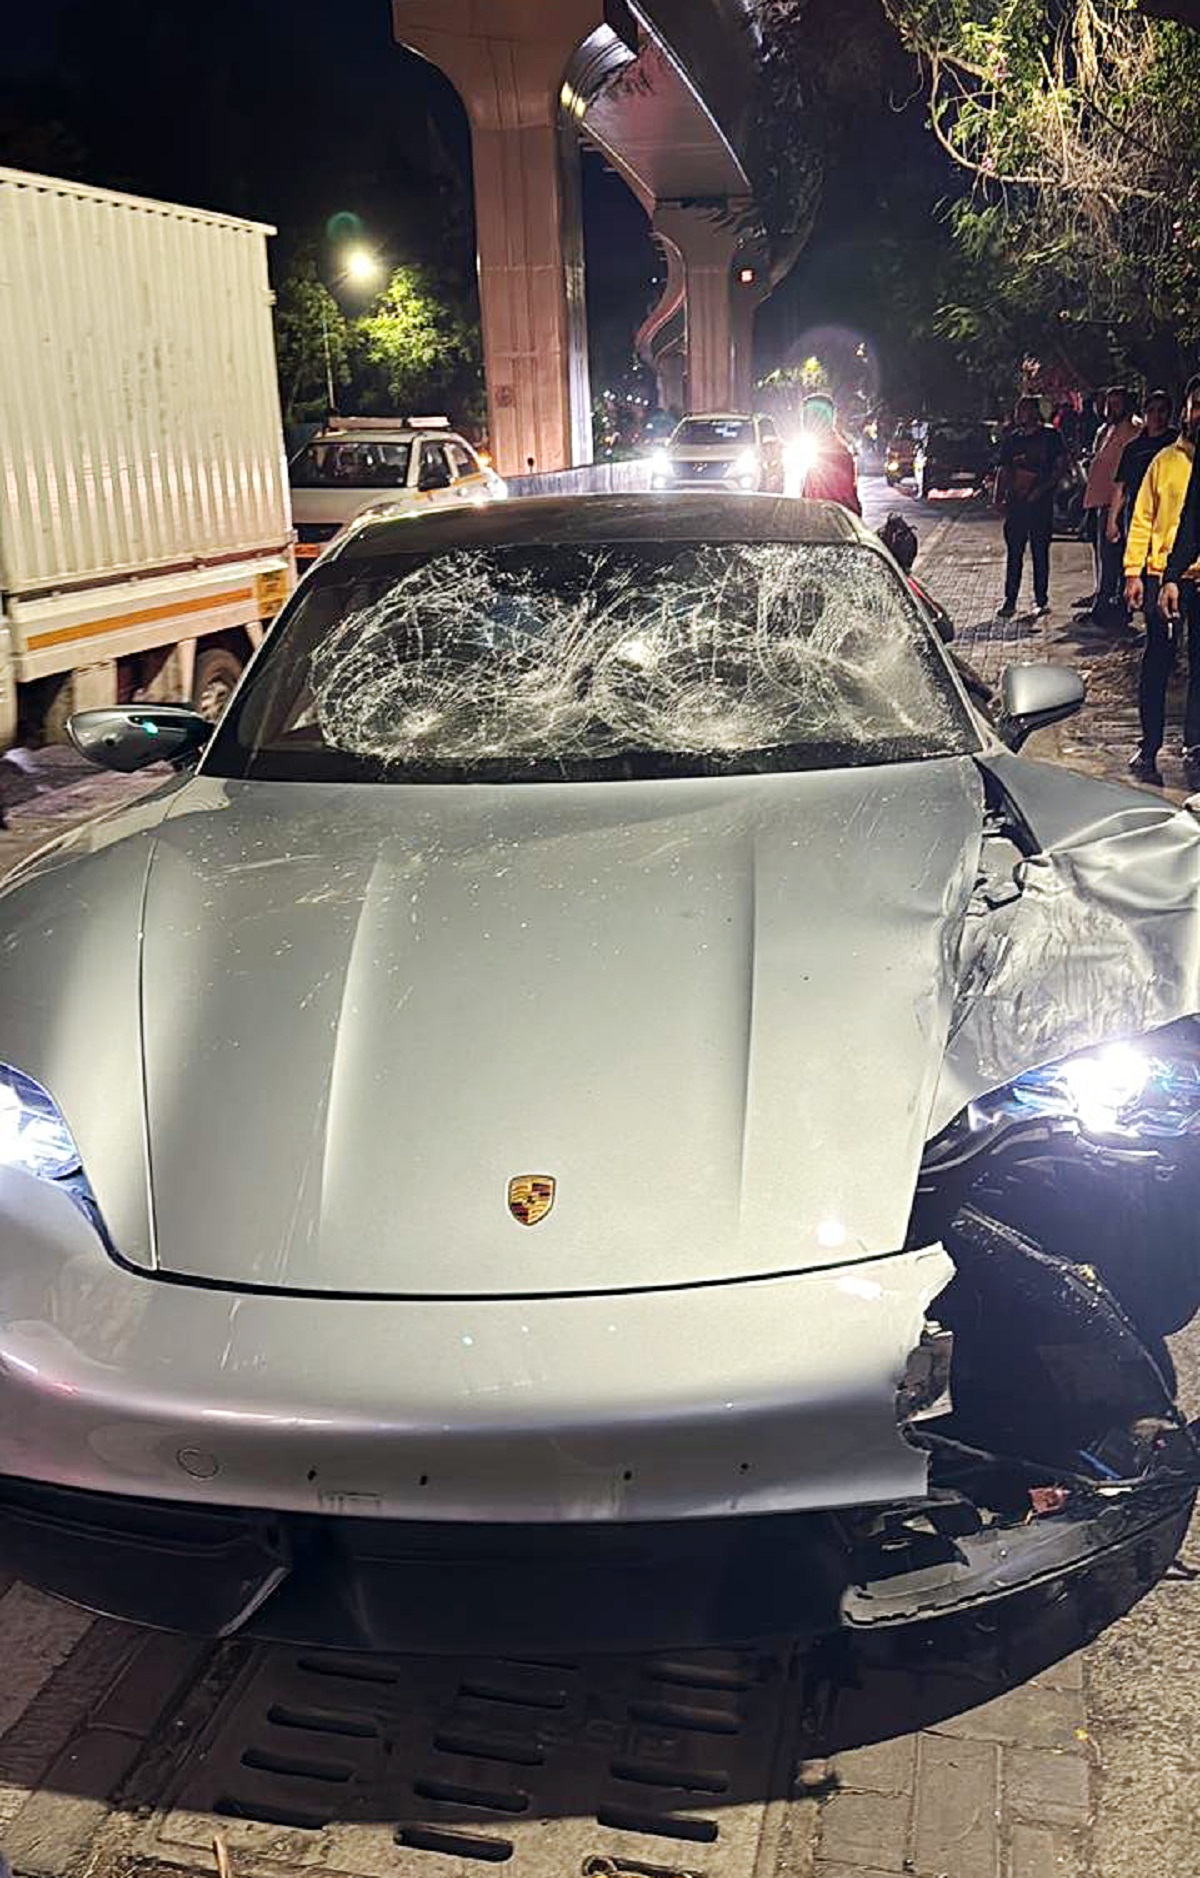 The banged up Porsche after the accident